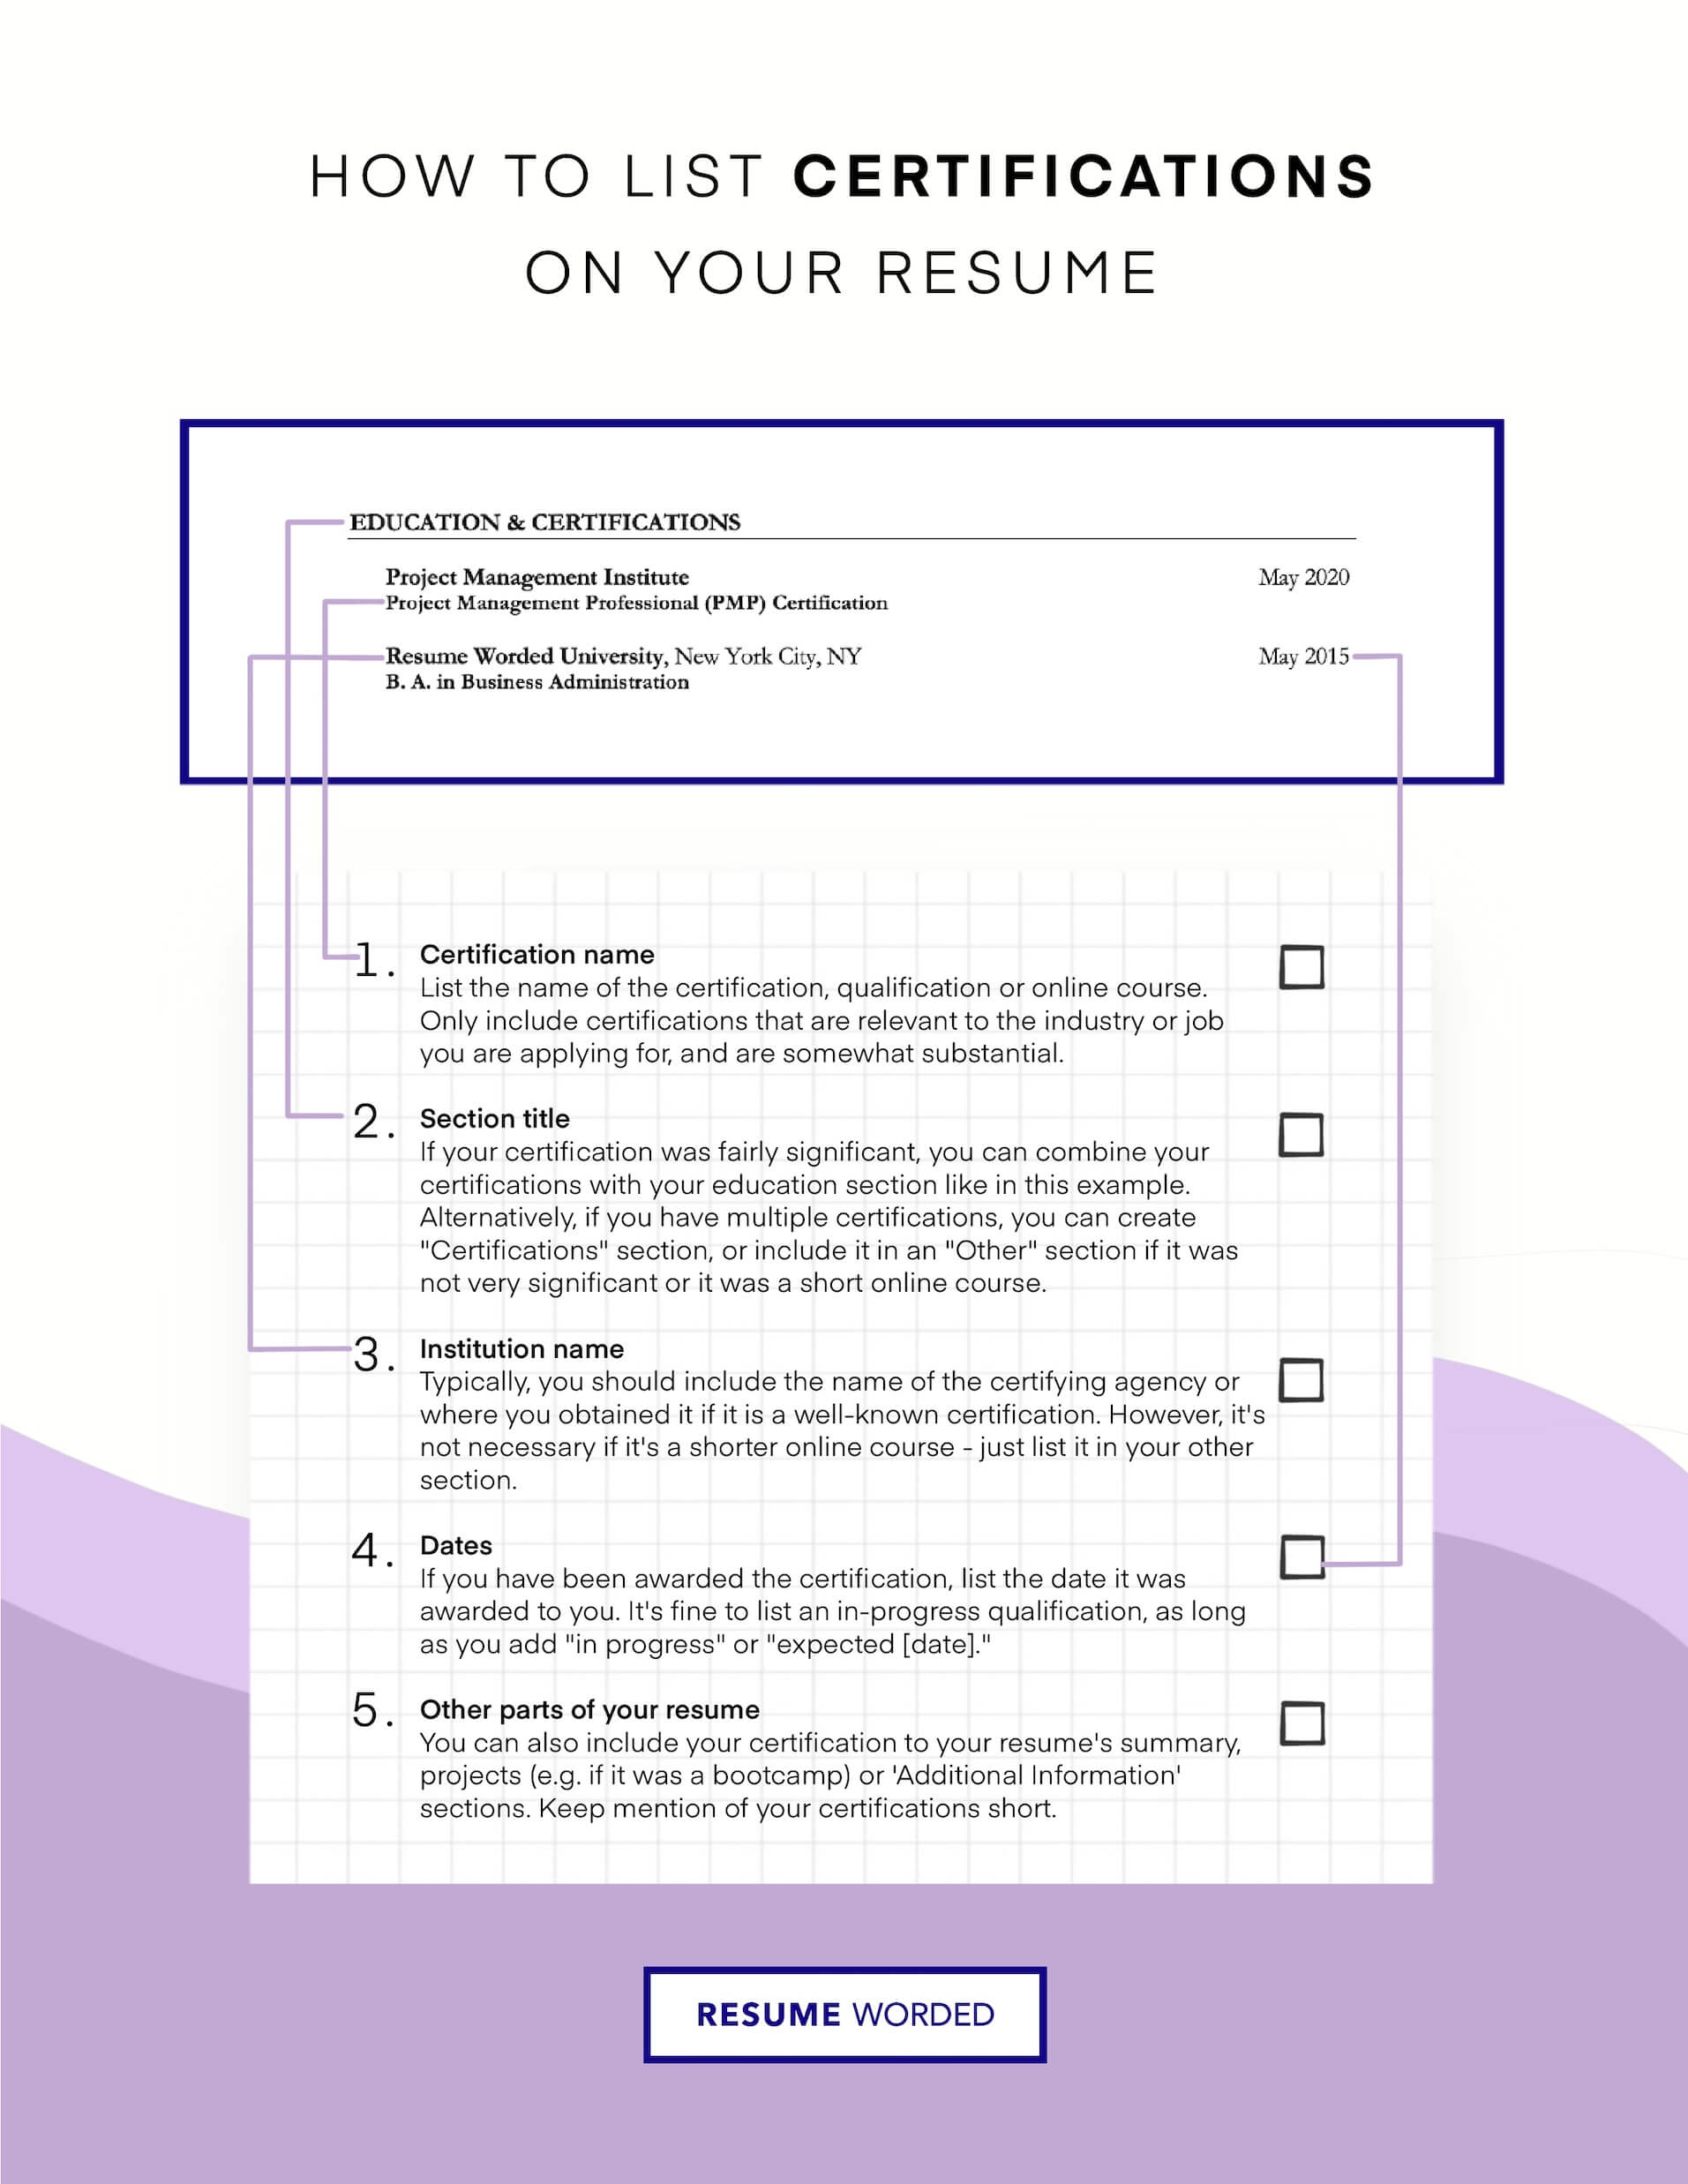 Obtain certification to broaden your opportunities as a psychology research assistant - Psychology Research Assistant Resume